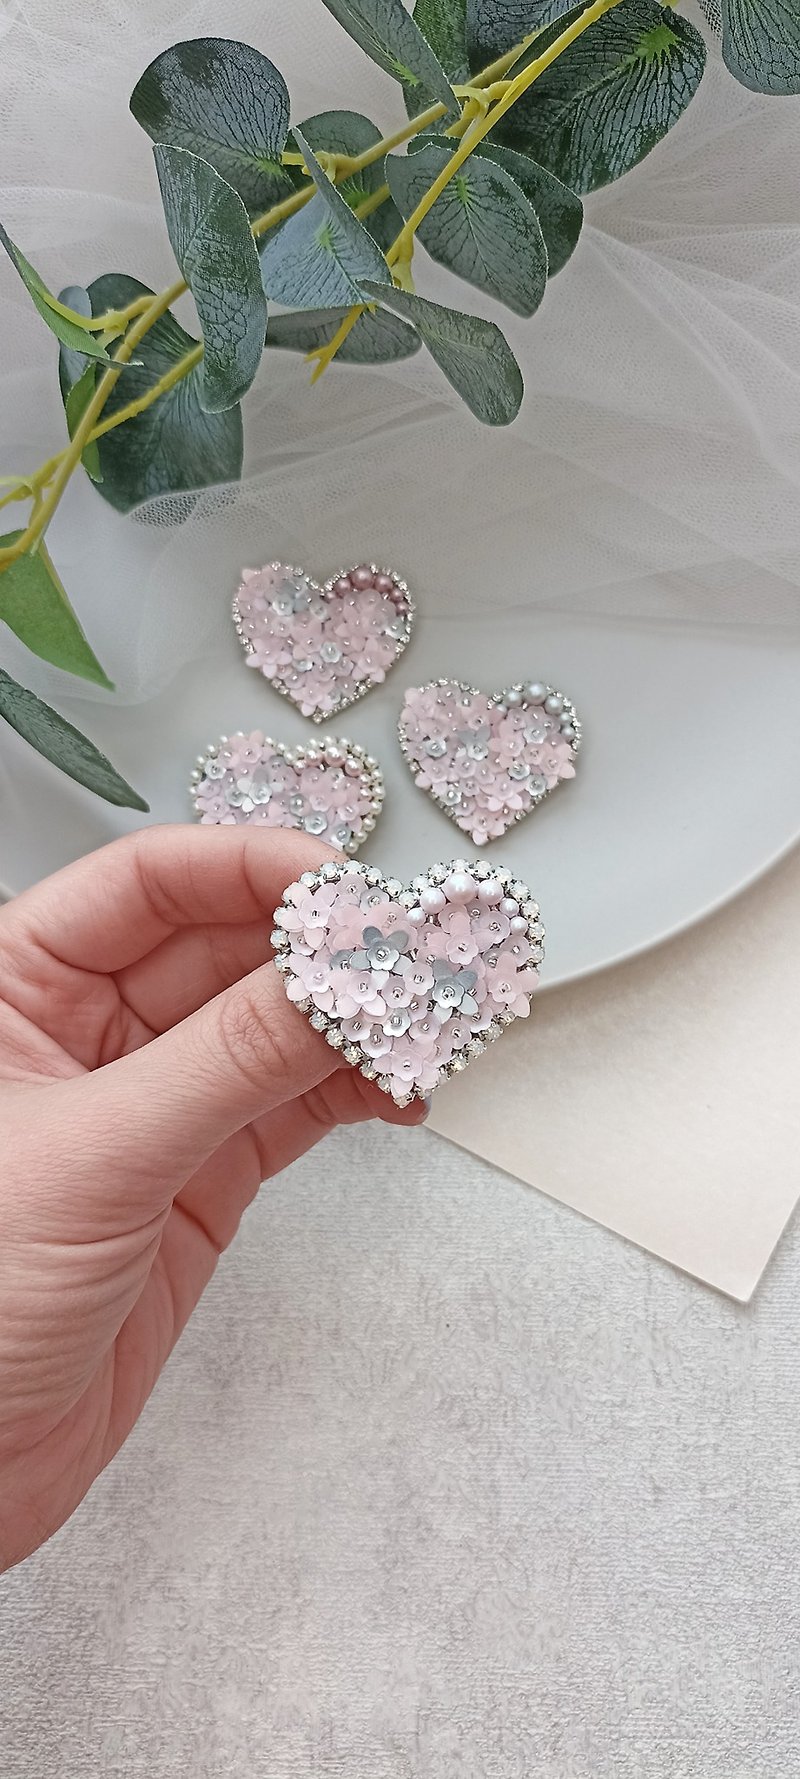 Pink heart brooch gift for her, delicate pink brooch, handmade heart pin - 胸針/心口針 - 不鏽鋼 粉紅色